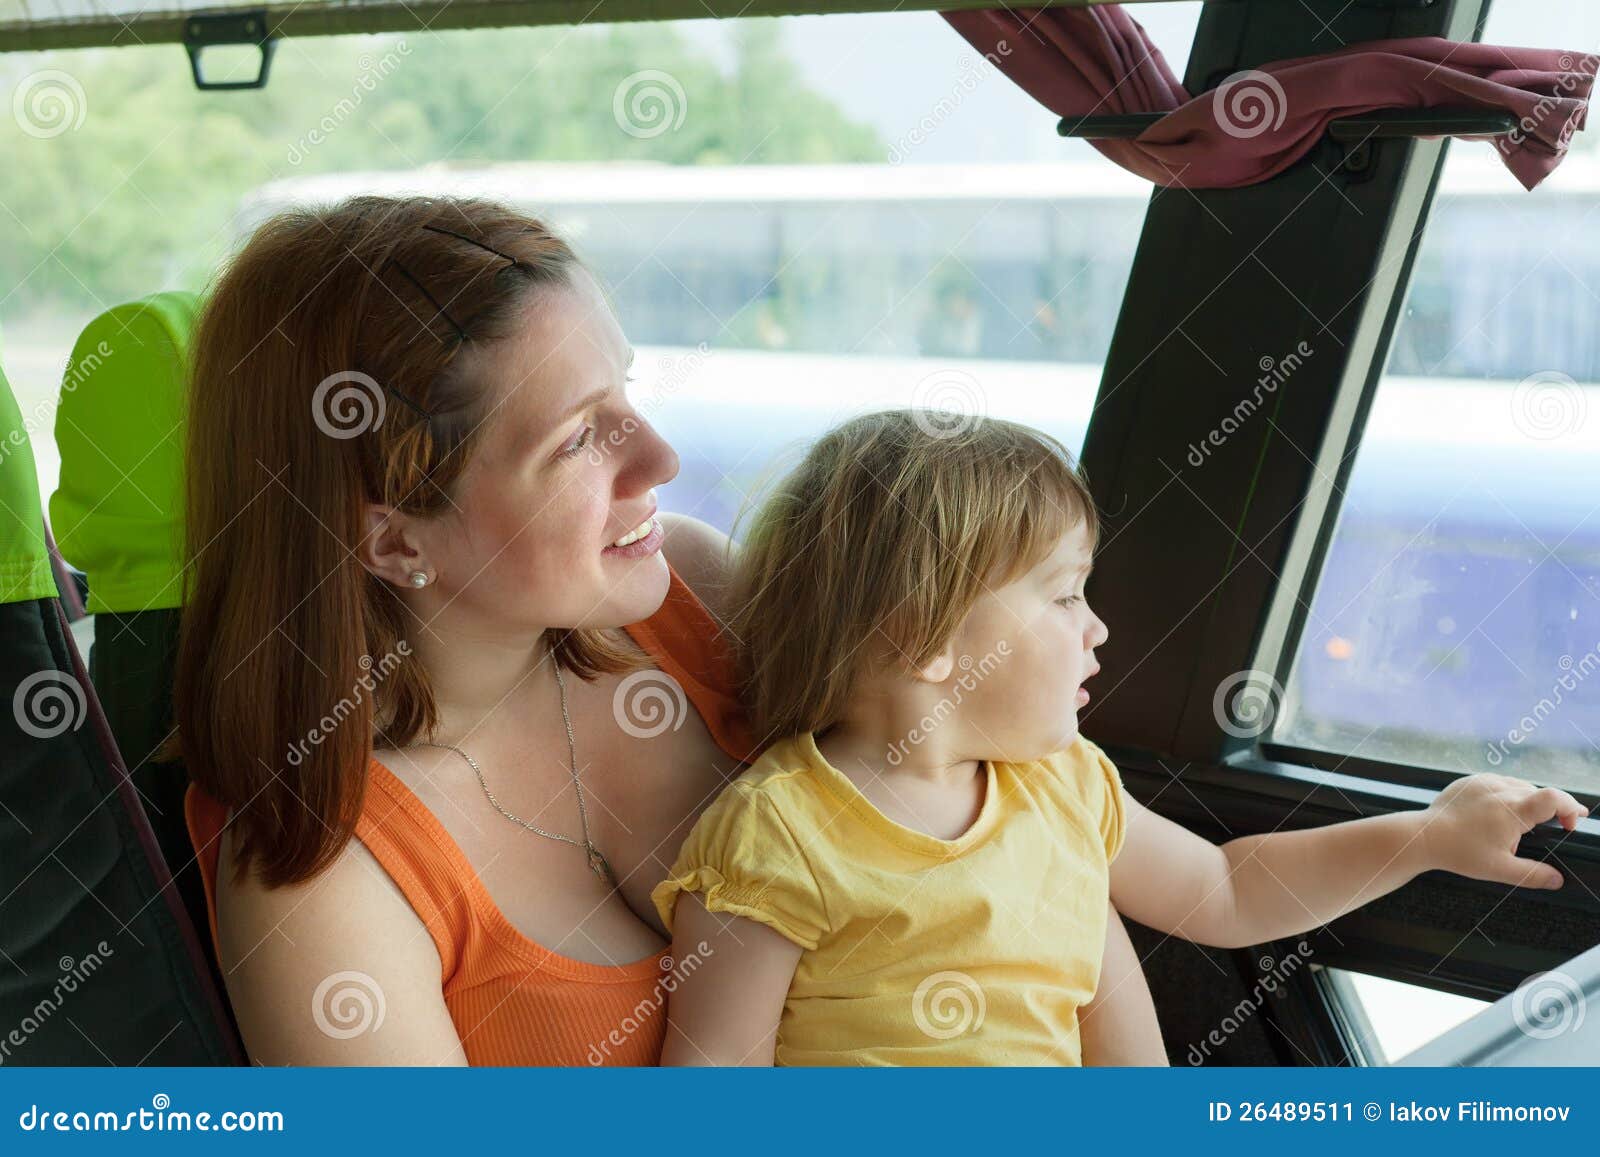 mother and child in autobus